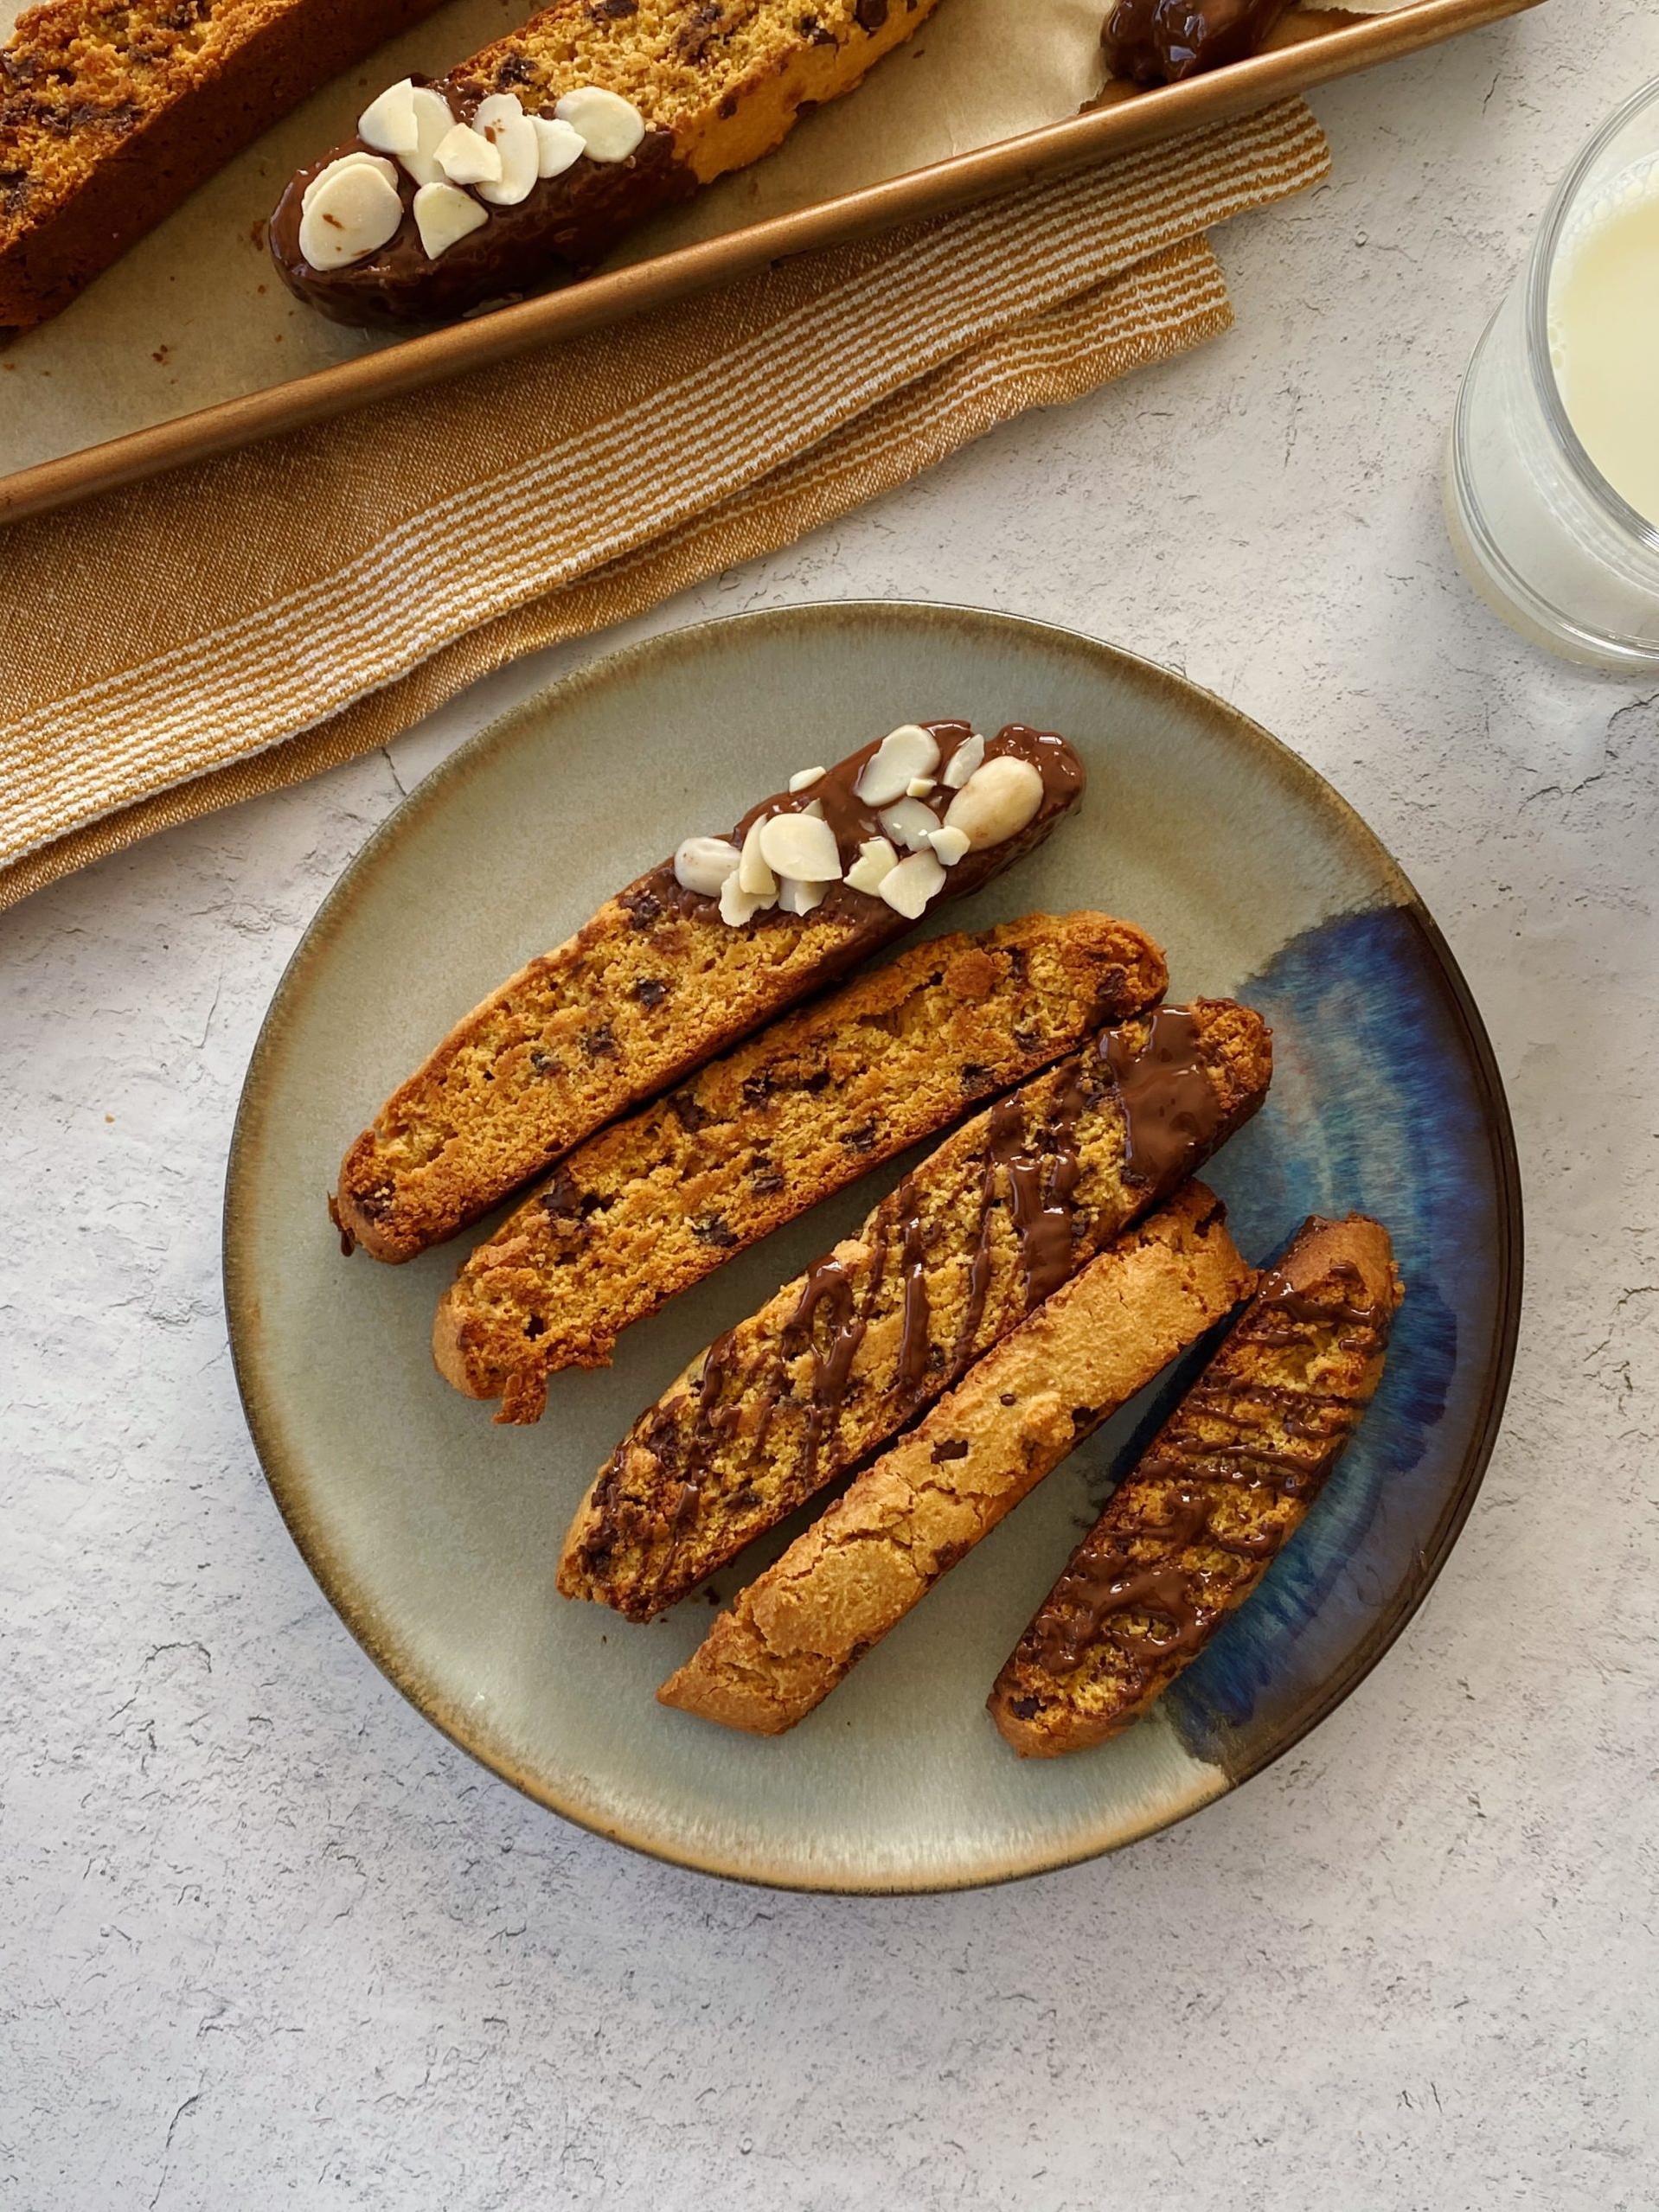  Pair these delicious biscotti with a hot cup of coffee, tea or hot cocoa for a comforting snack!